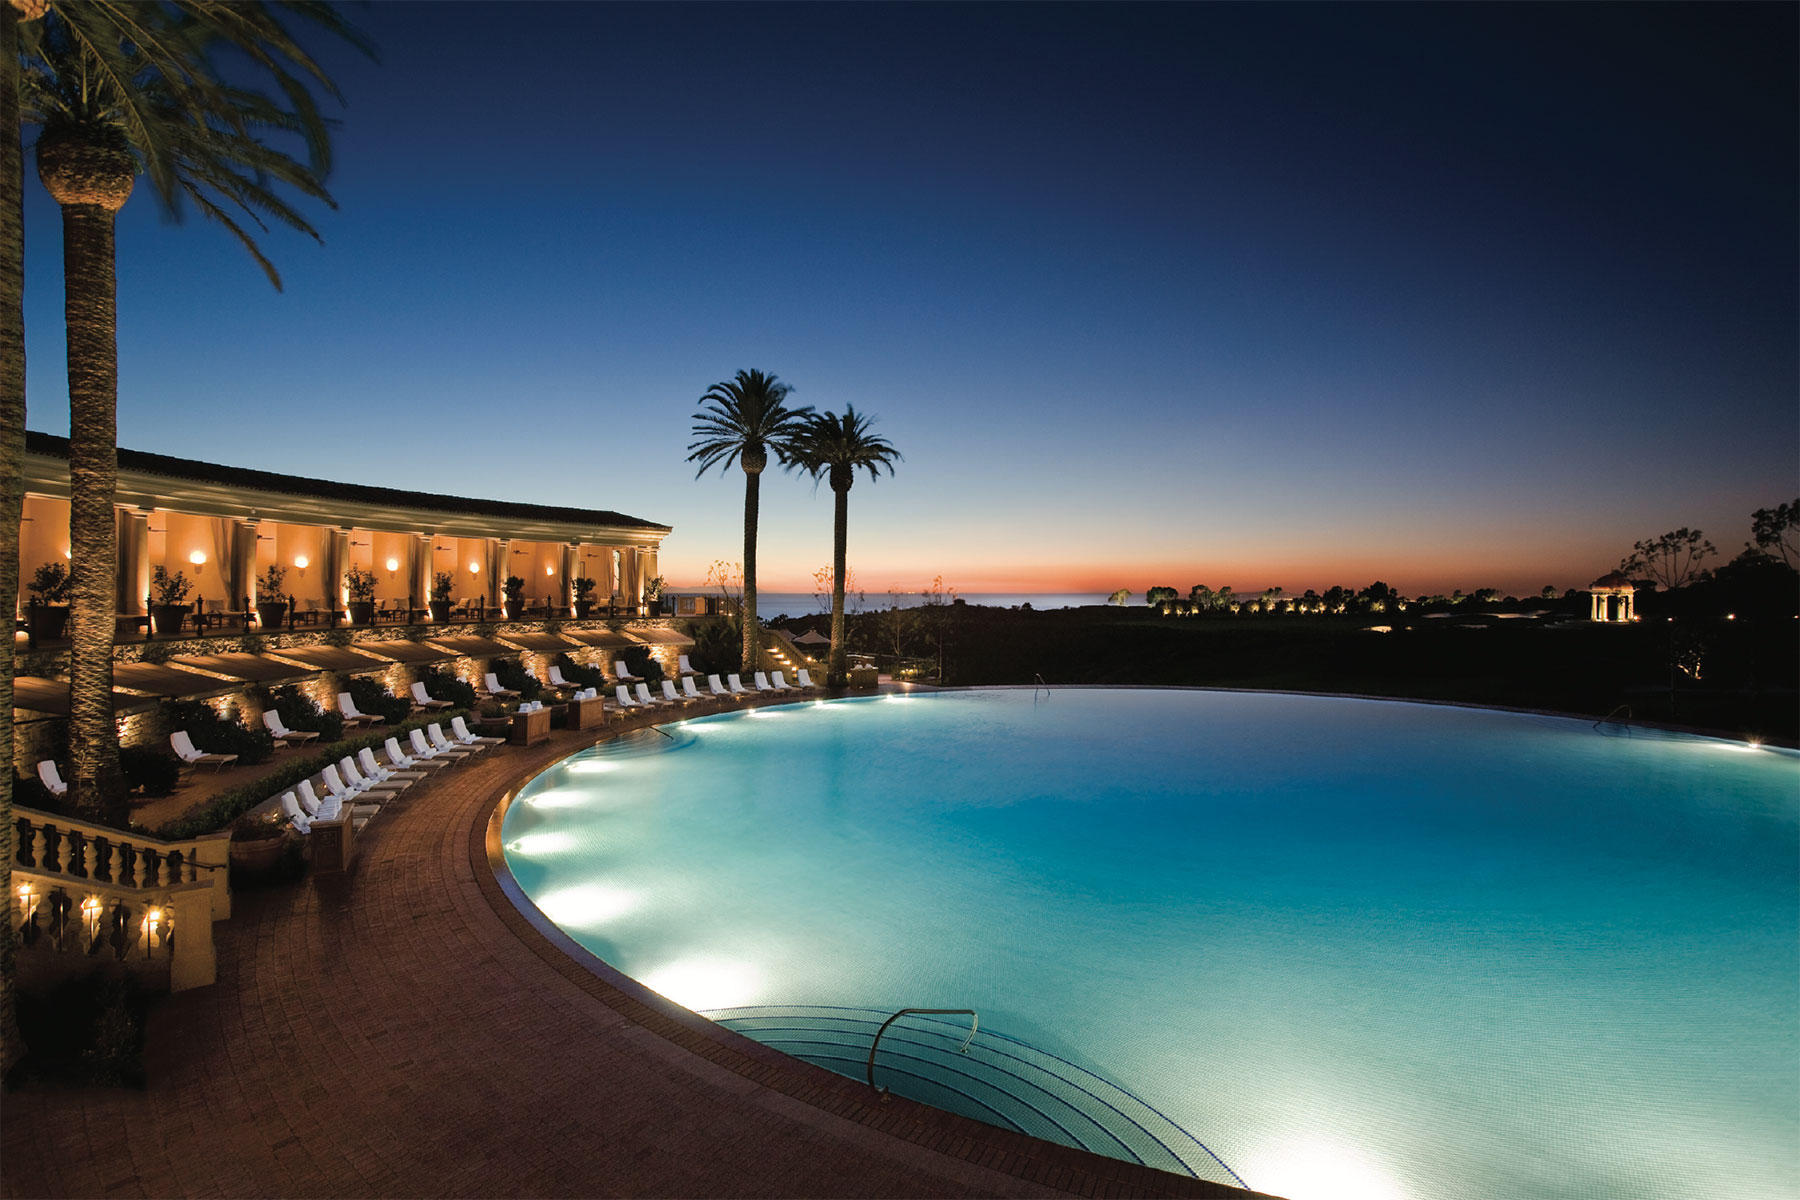 Pelican Hill pool at night